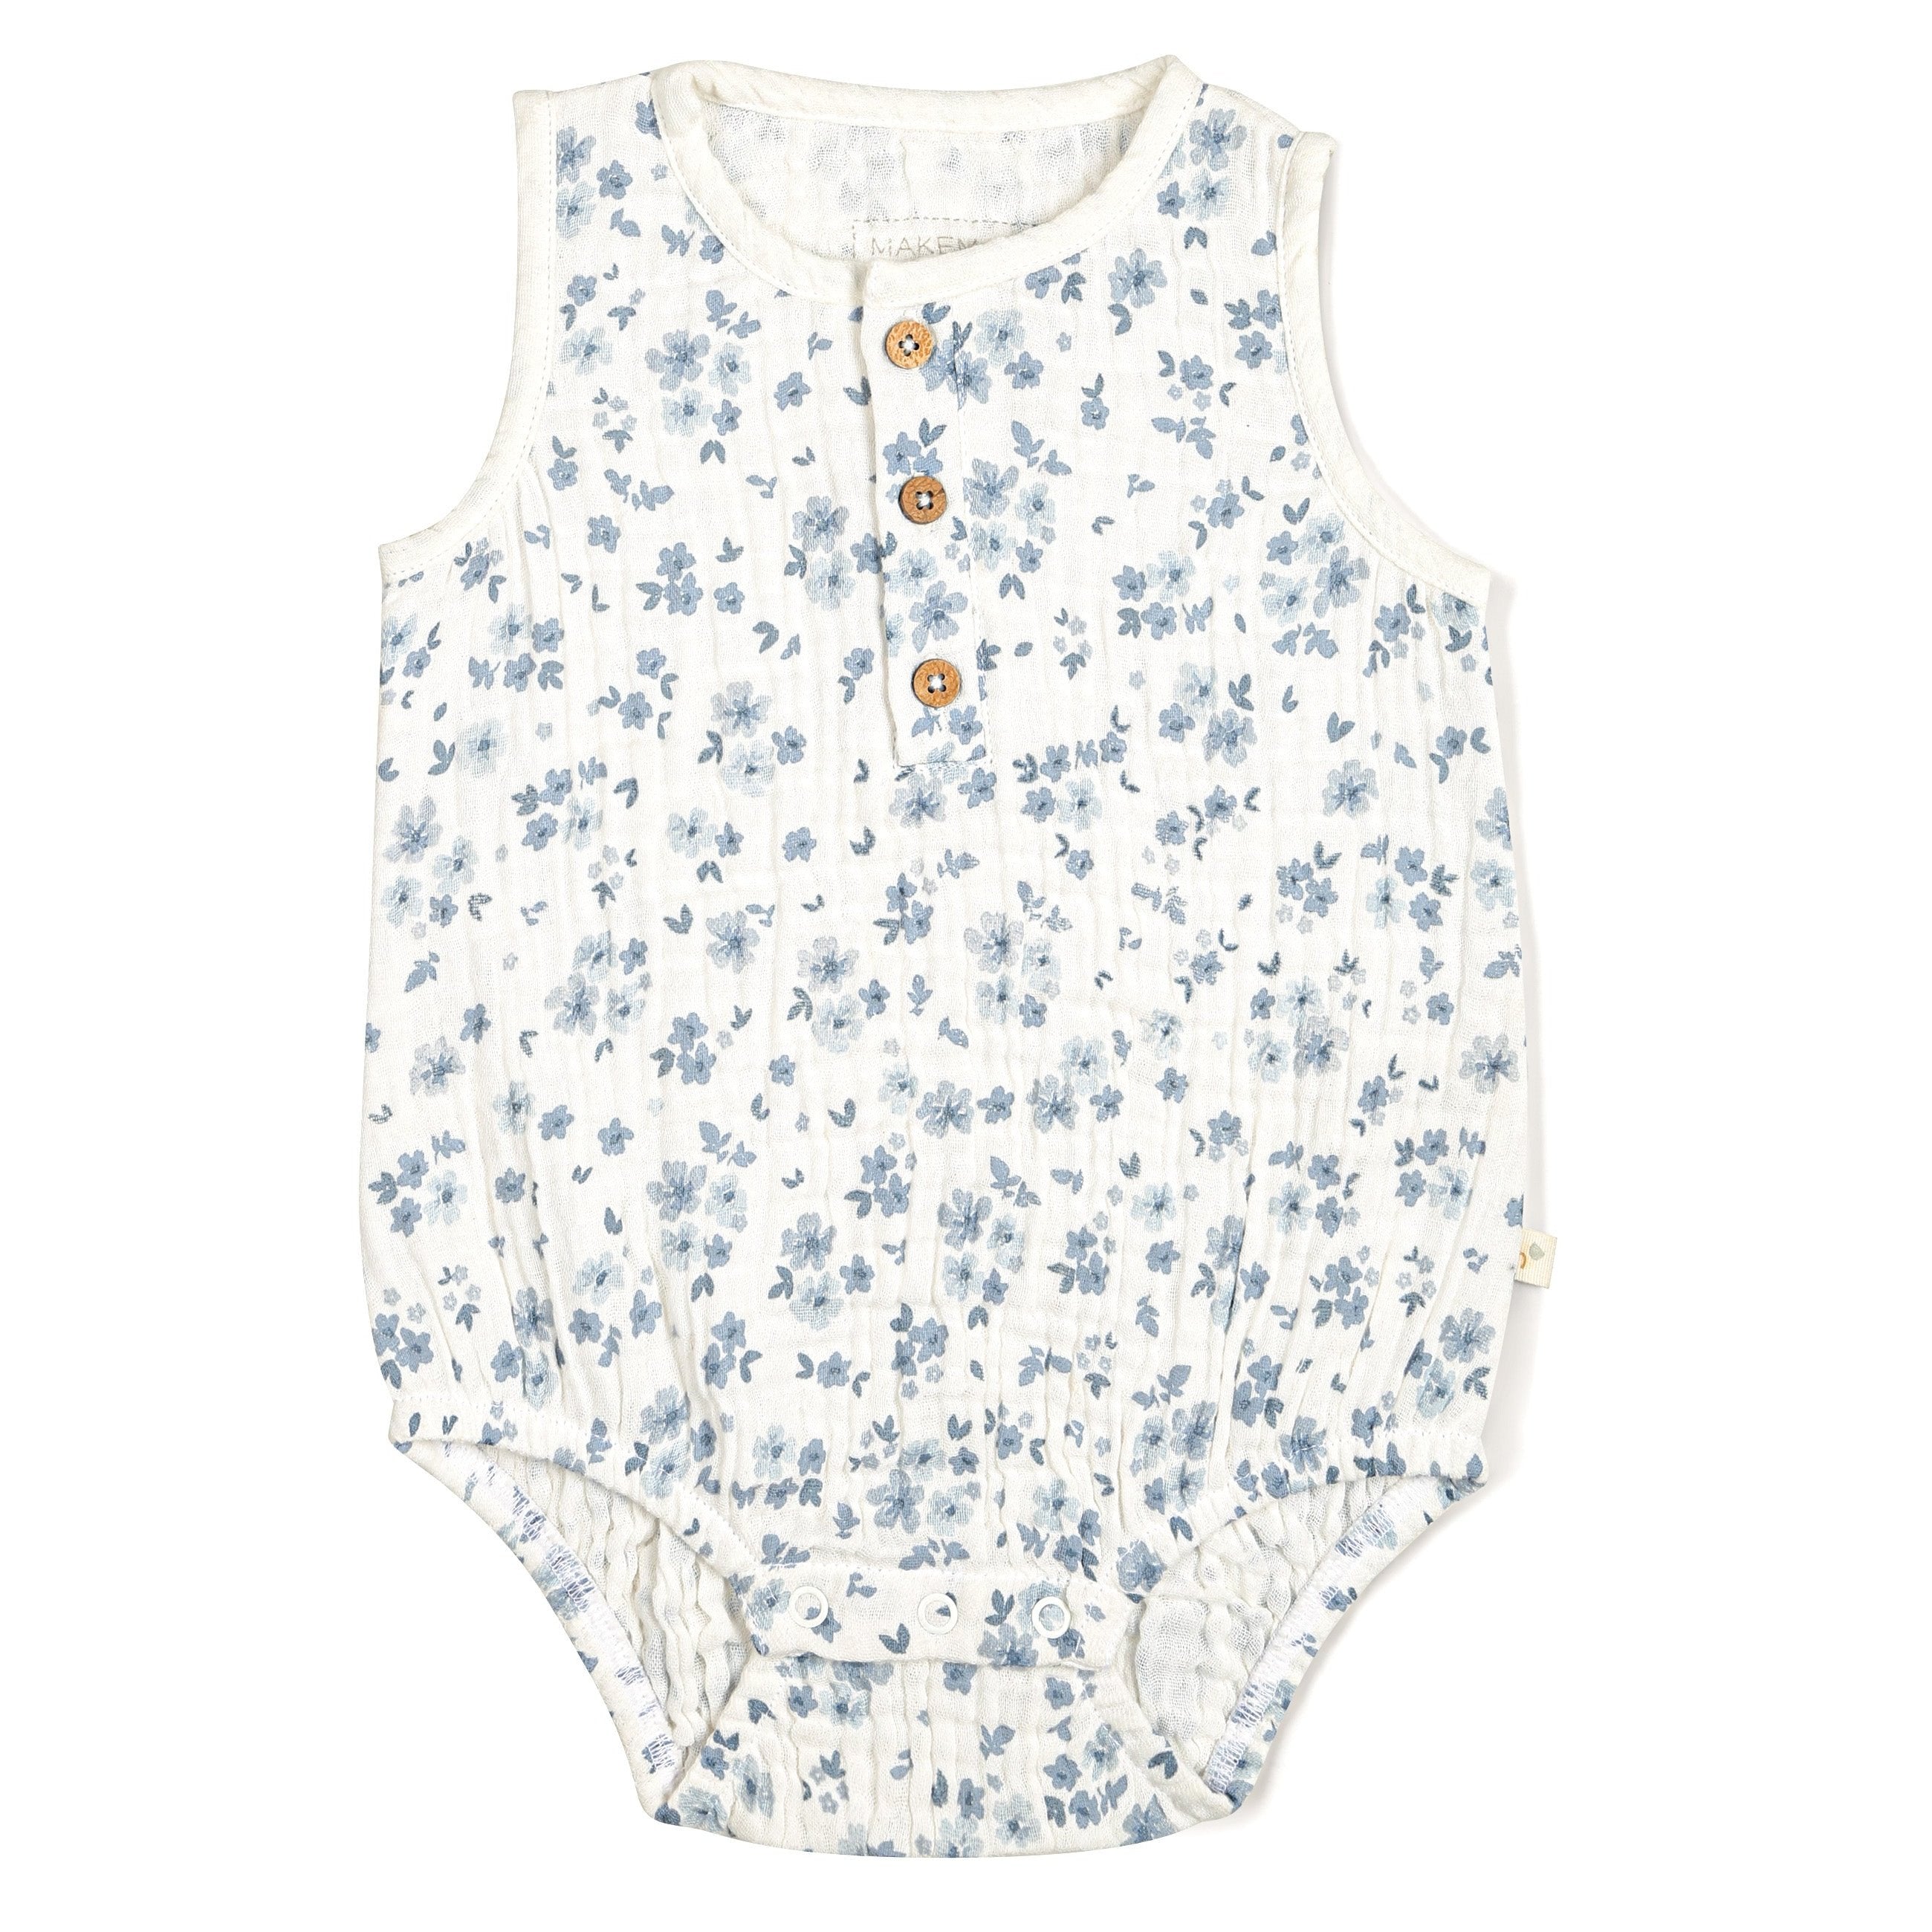 A sleeveless Organic Muslin Bubble Onesie in Periwinkle with blue floral patterns on a white background, featuring three wooden buttons and ruffled leg openings, perfect for a toddler girl by Makemake Organics.